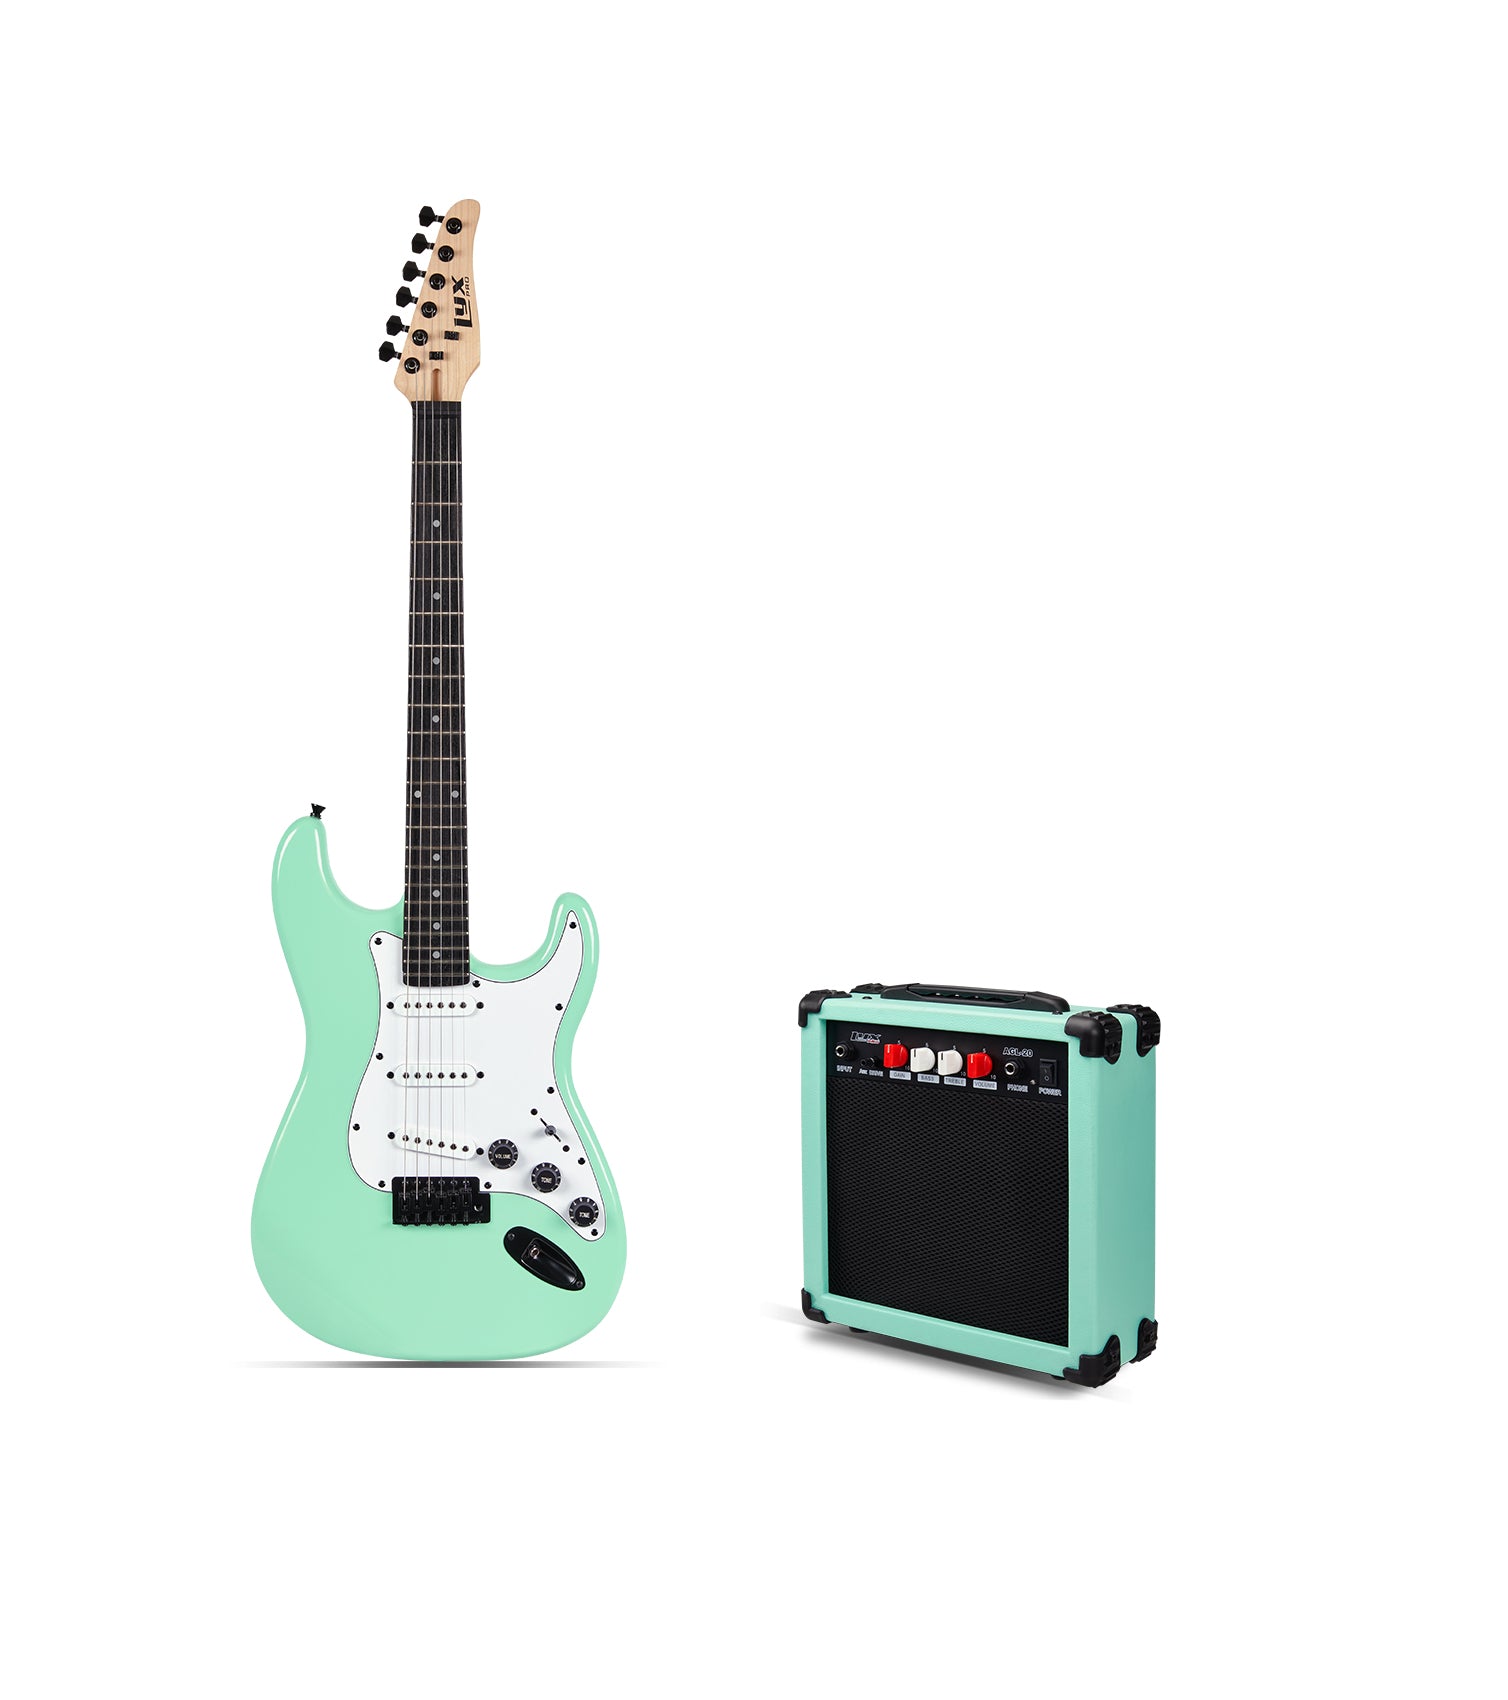 36” Green beginner electric guitar with amp